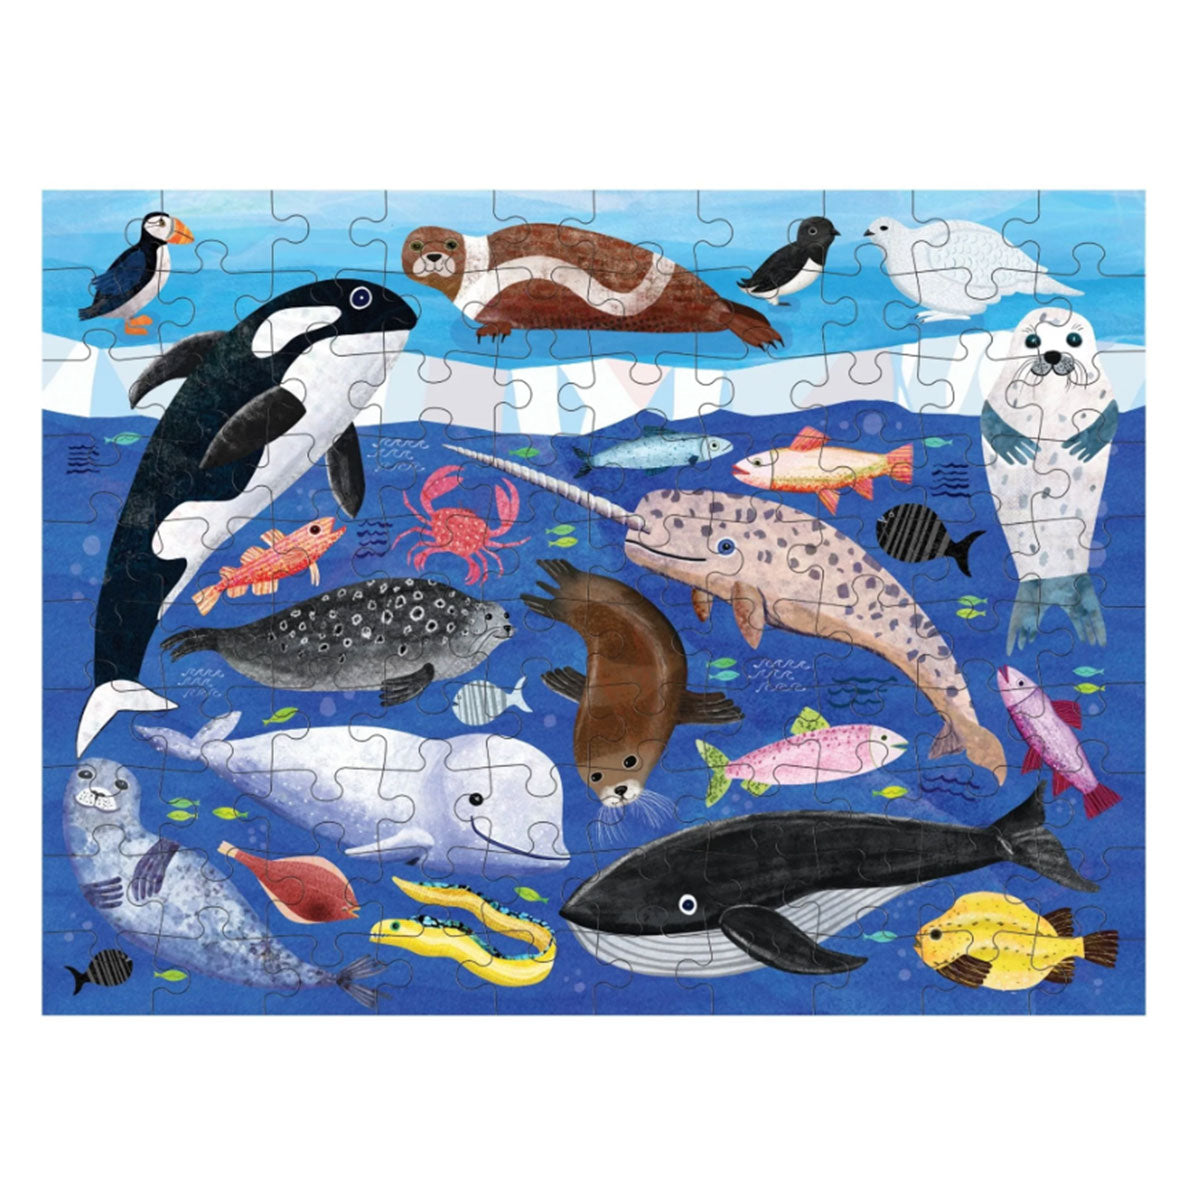 Whale Star - Jigsaw Puzzle 1000 Pieces - If Our Beginnings Were Different